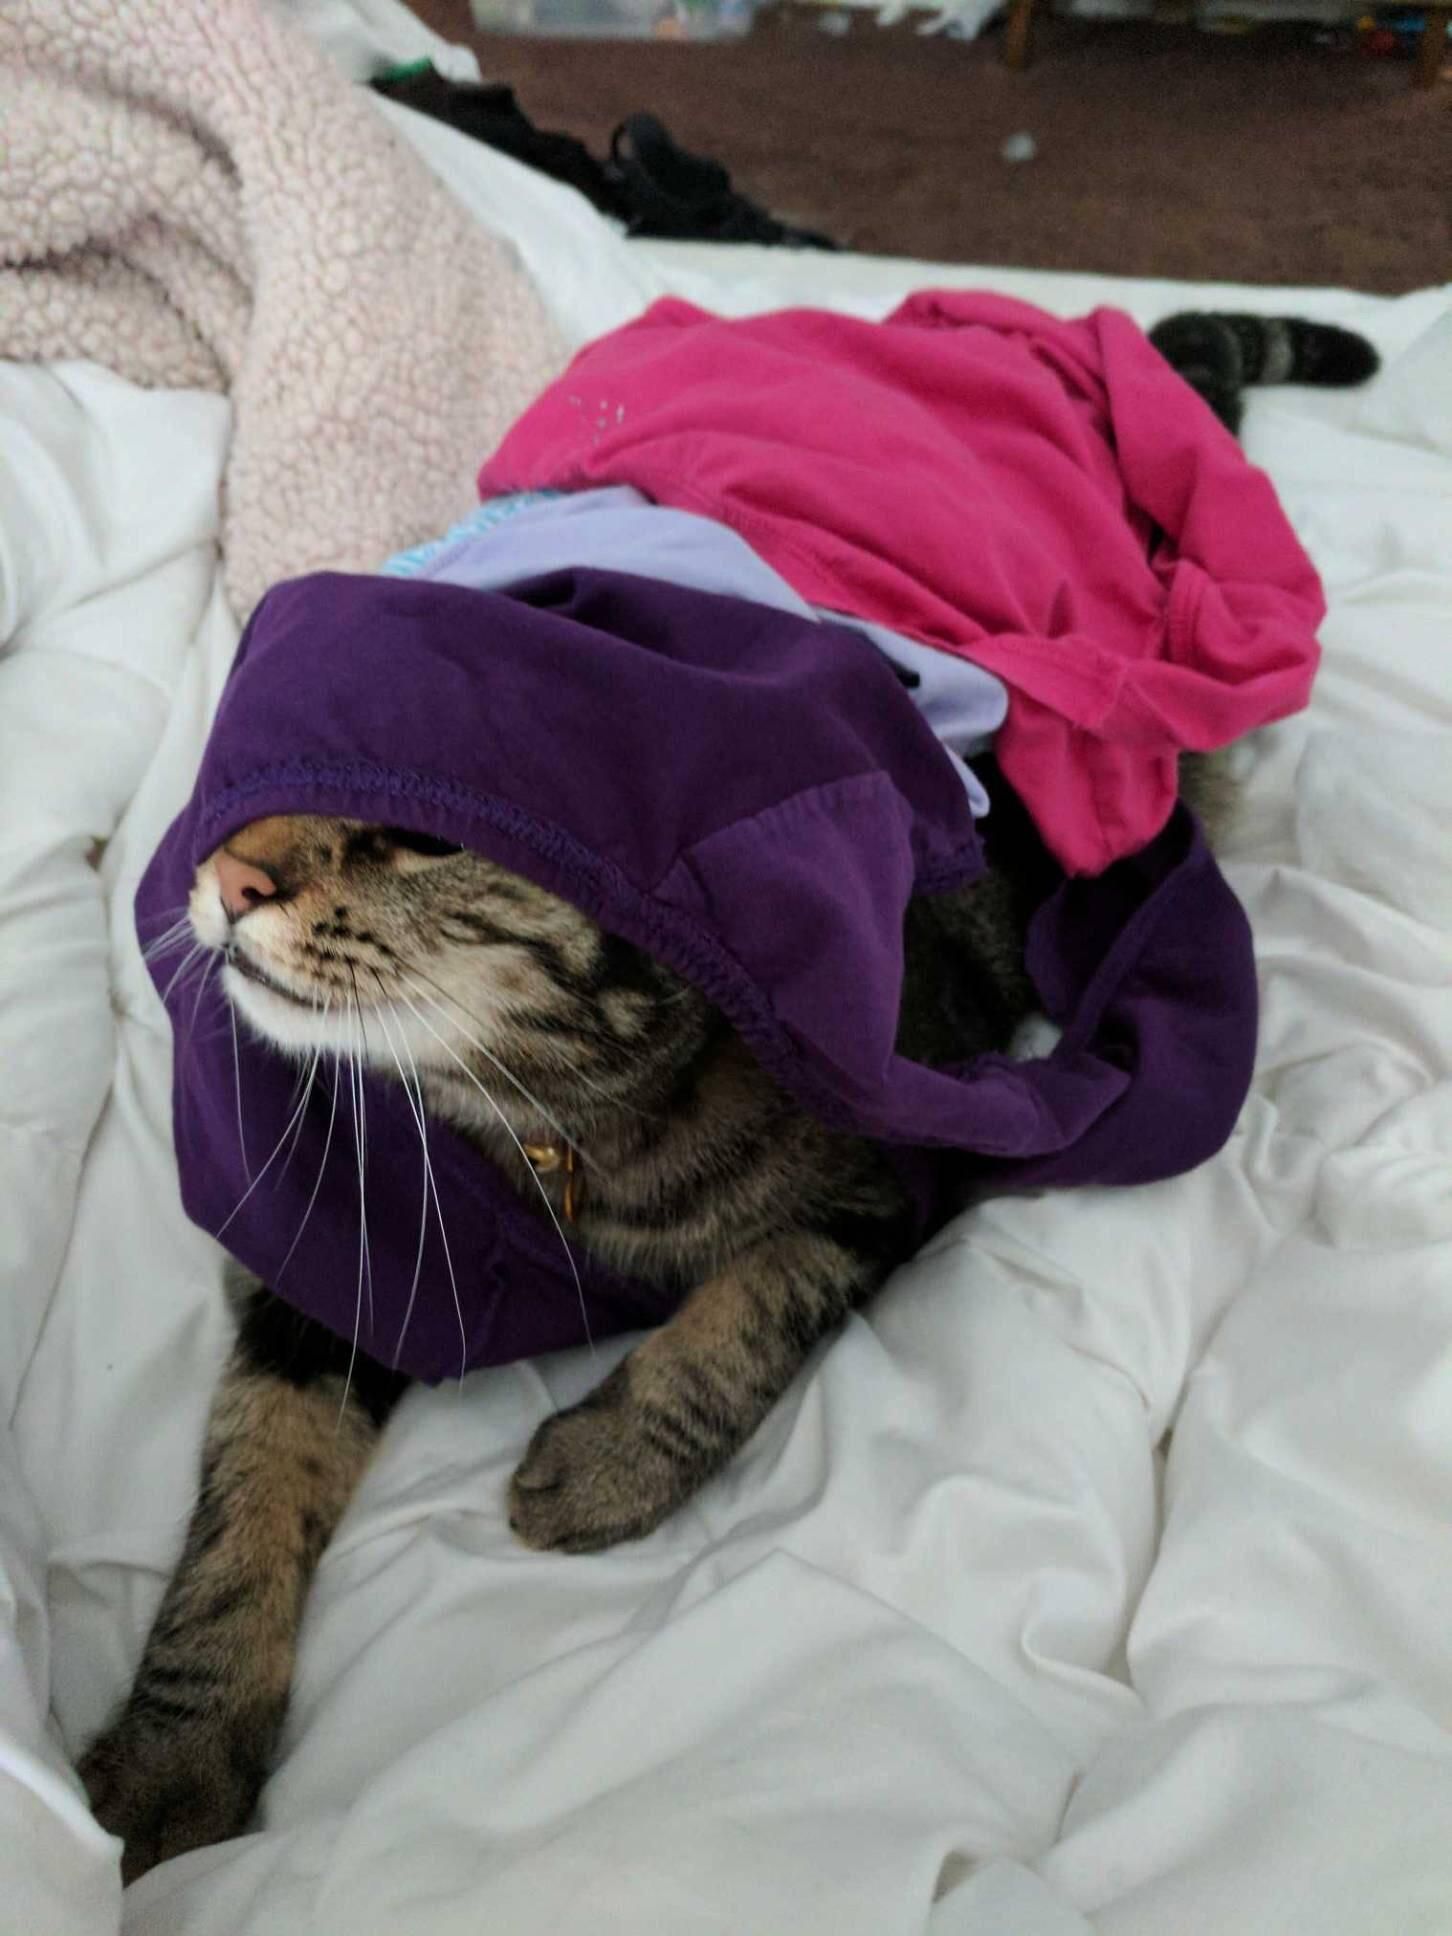 Khajiit has under wares if you have coin